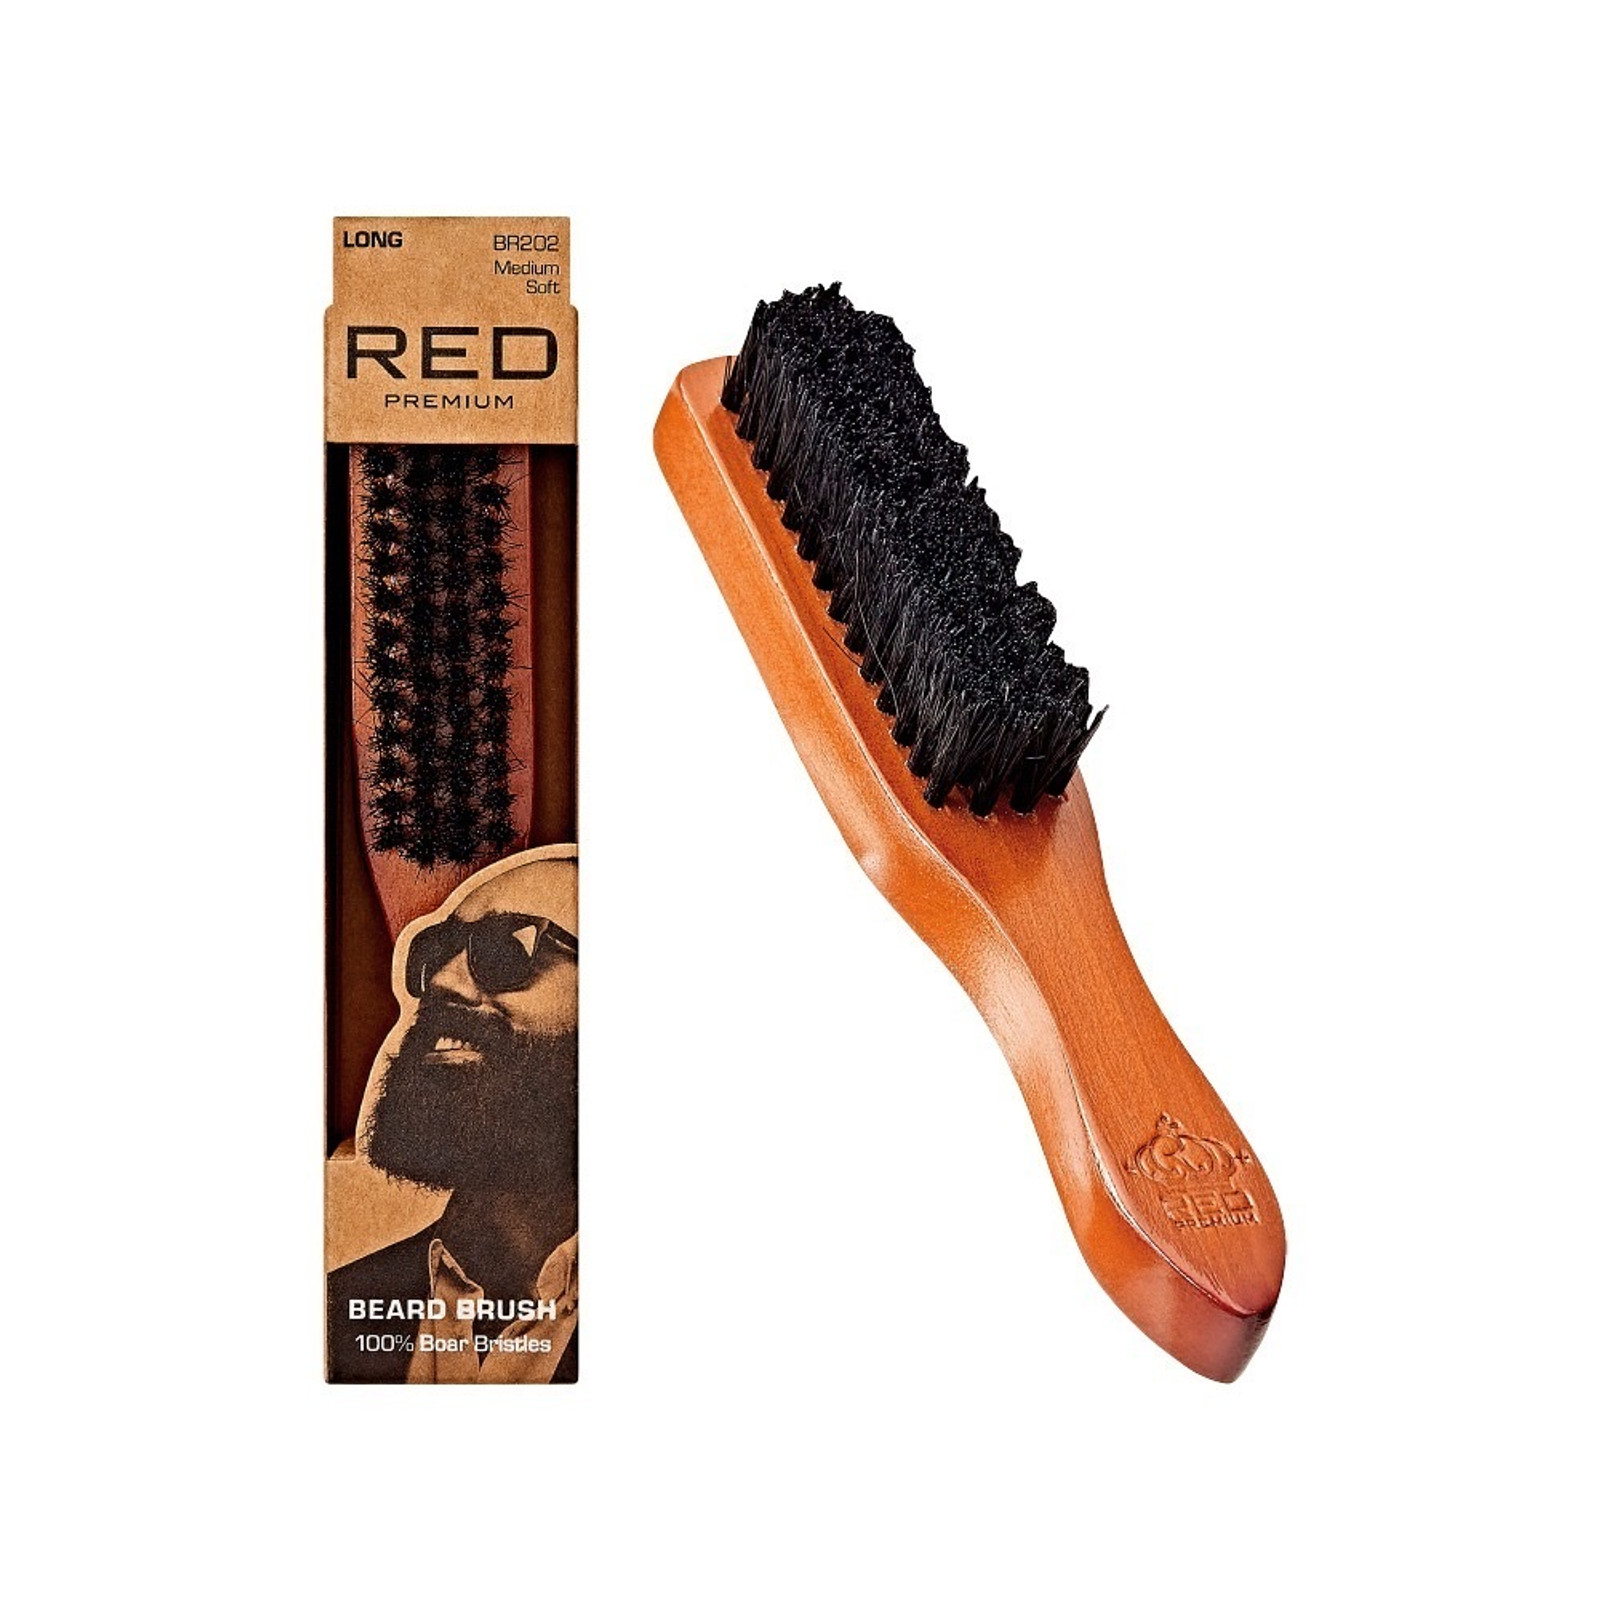 Soft Chemical Resistant Brush (Red) 8”